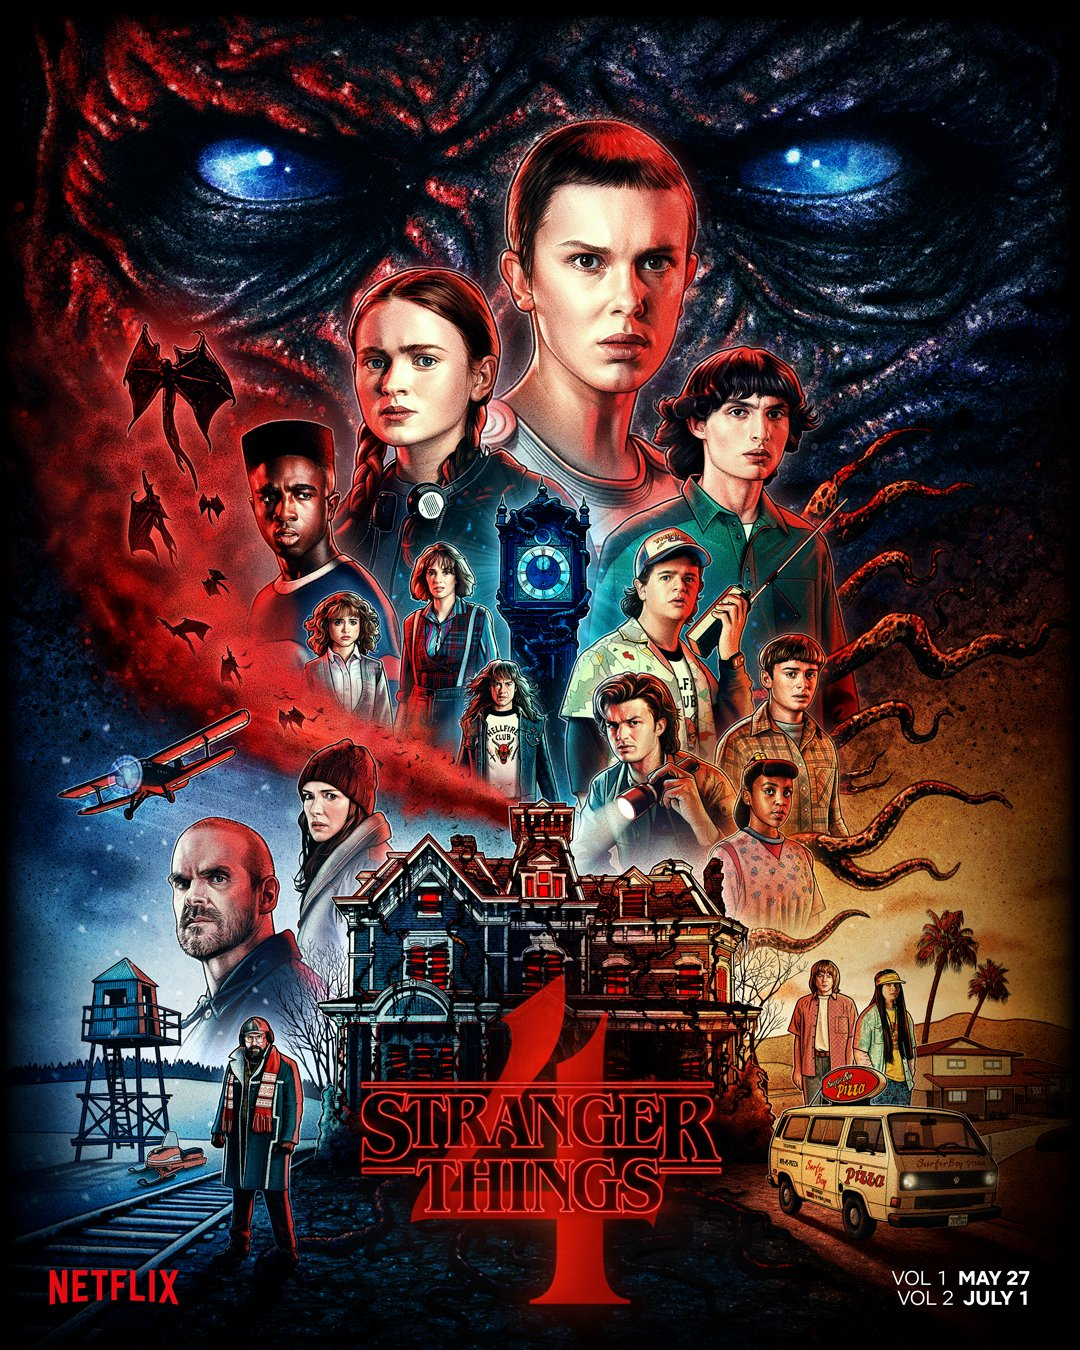 Stranger Things 4 Poster Unleashes Vecna, Demo Bats, Tentacles and More Fresh Horrors